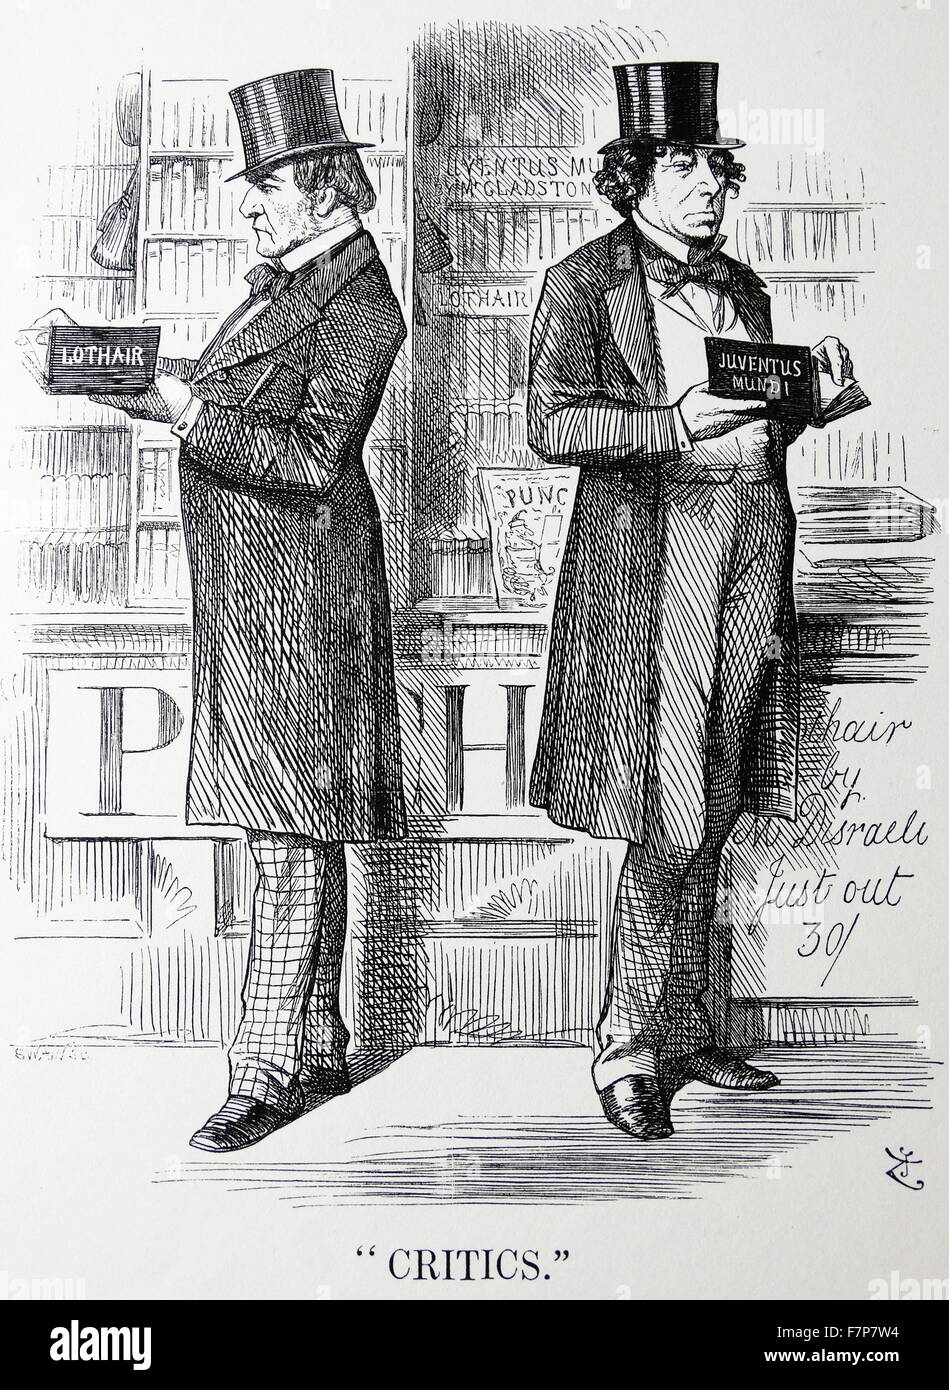 Disraeli (1804-81) and GLADSTONE (1809-98) commenting on the other's literary productions. Stock Photo